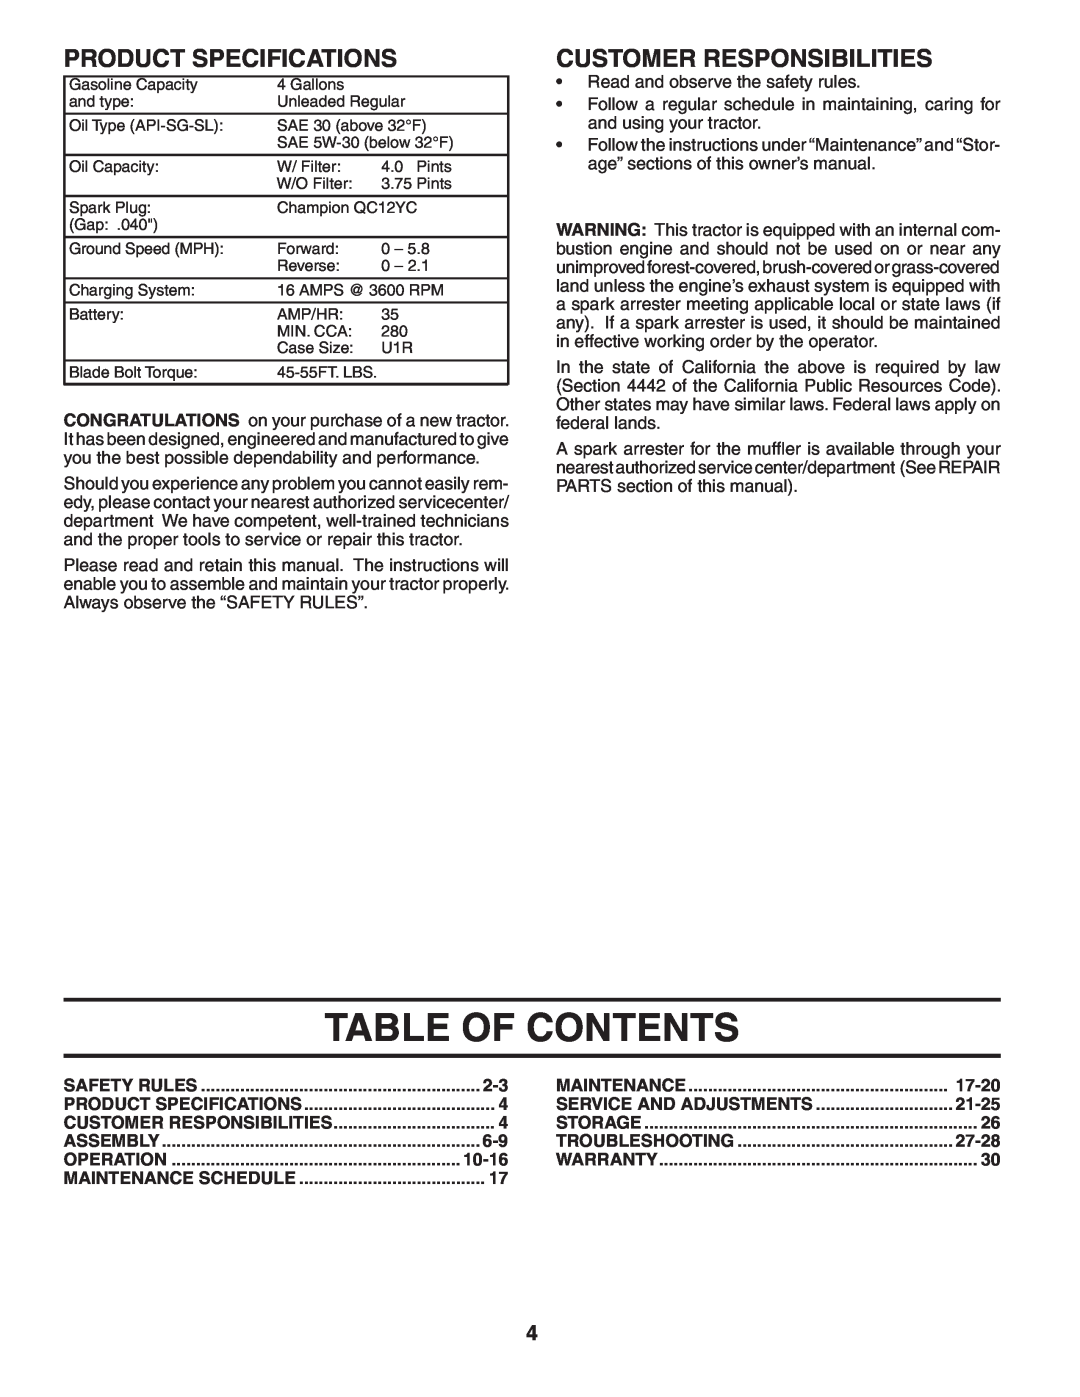 Poulan 402464 manual Table Of Contents, Product Specifications, Customer Responsibilities, 10-16, 17-20, 21-25, 27-28 